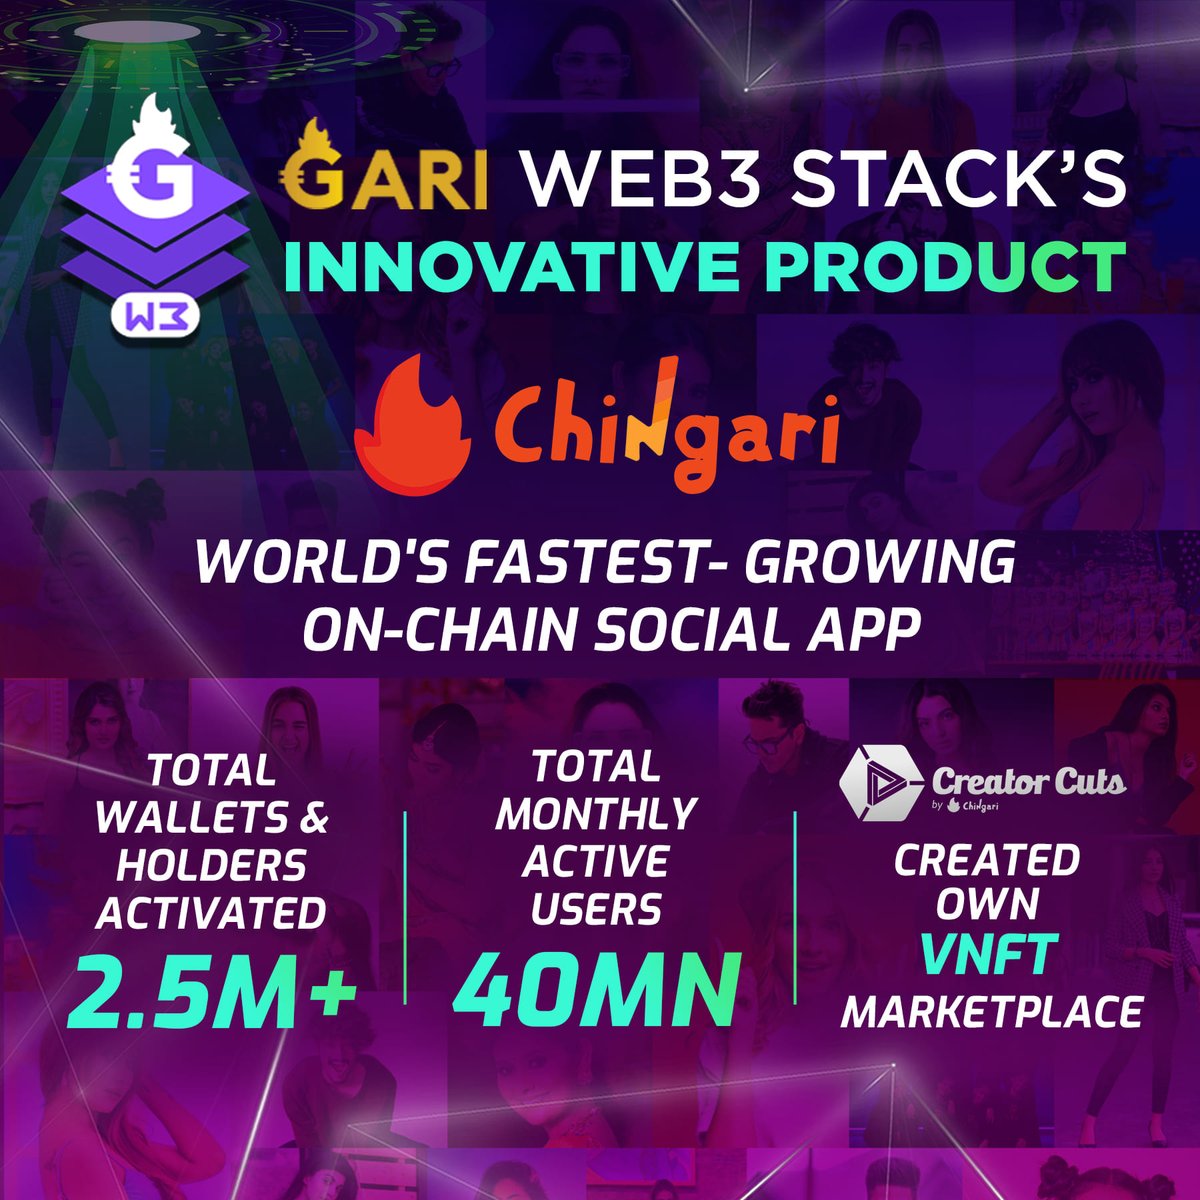 We’ve come a long way, creating headlines & achieving the impossible! Here’s a quick stats highlighting our achievements and key launches. We’re geared to scale much beyond. 

Catch how we did it with our incredible GWS on 18th May '23 @ 10:15 am JPT at the @teamz_inc #web3summit